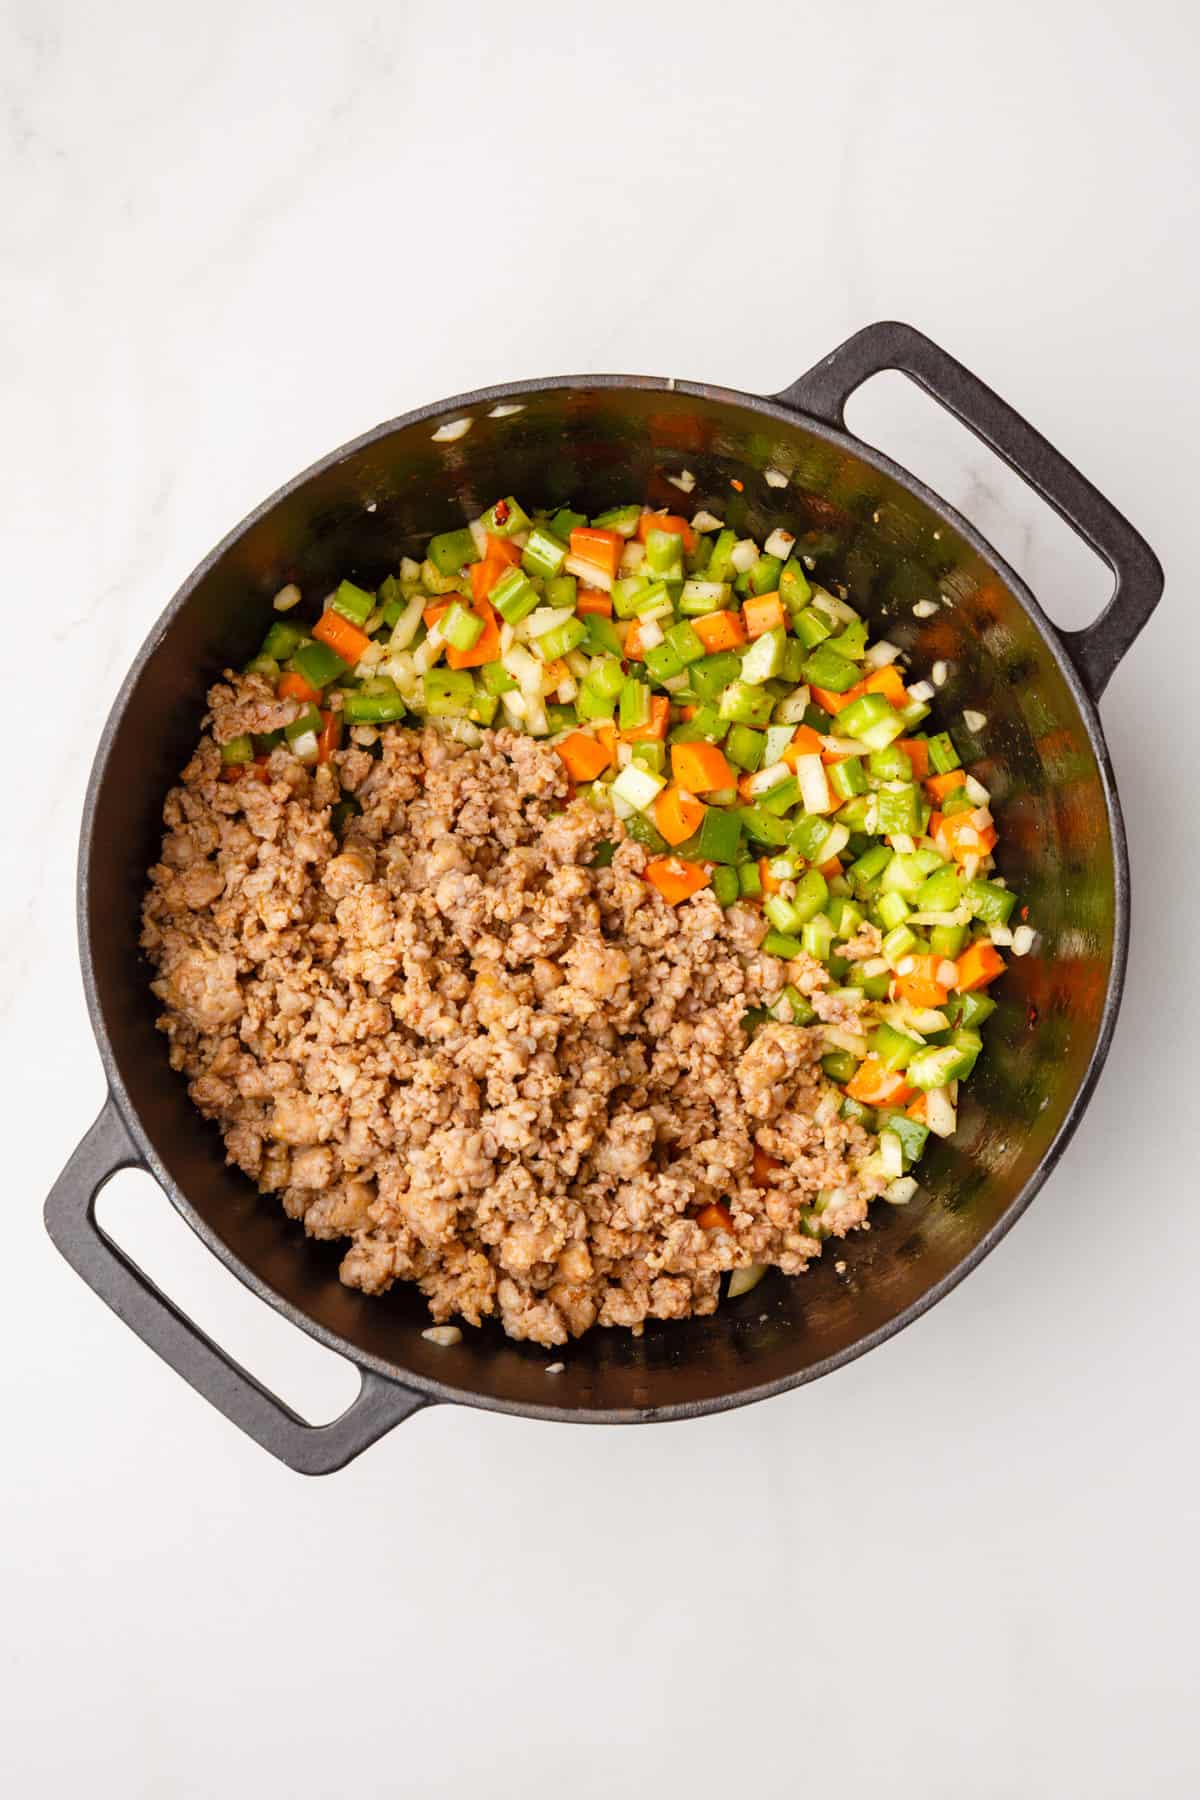 dutch oven with cooked chopped carrots, celery, green bell peppers, white onions and italian sausage